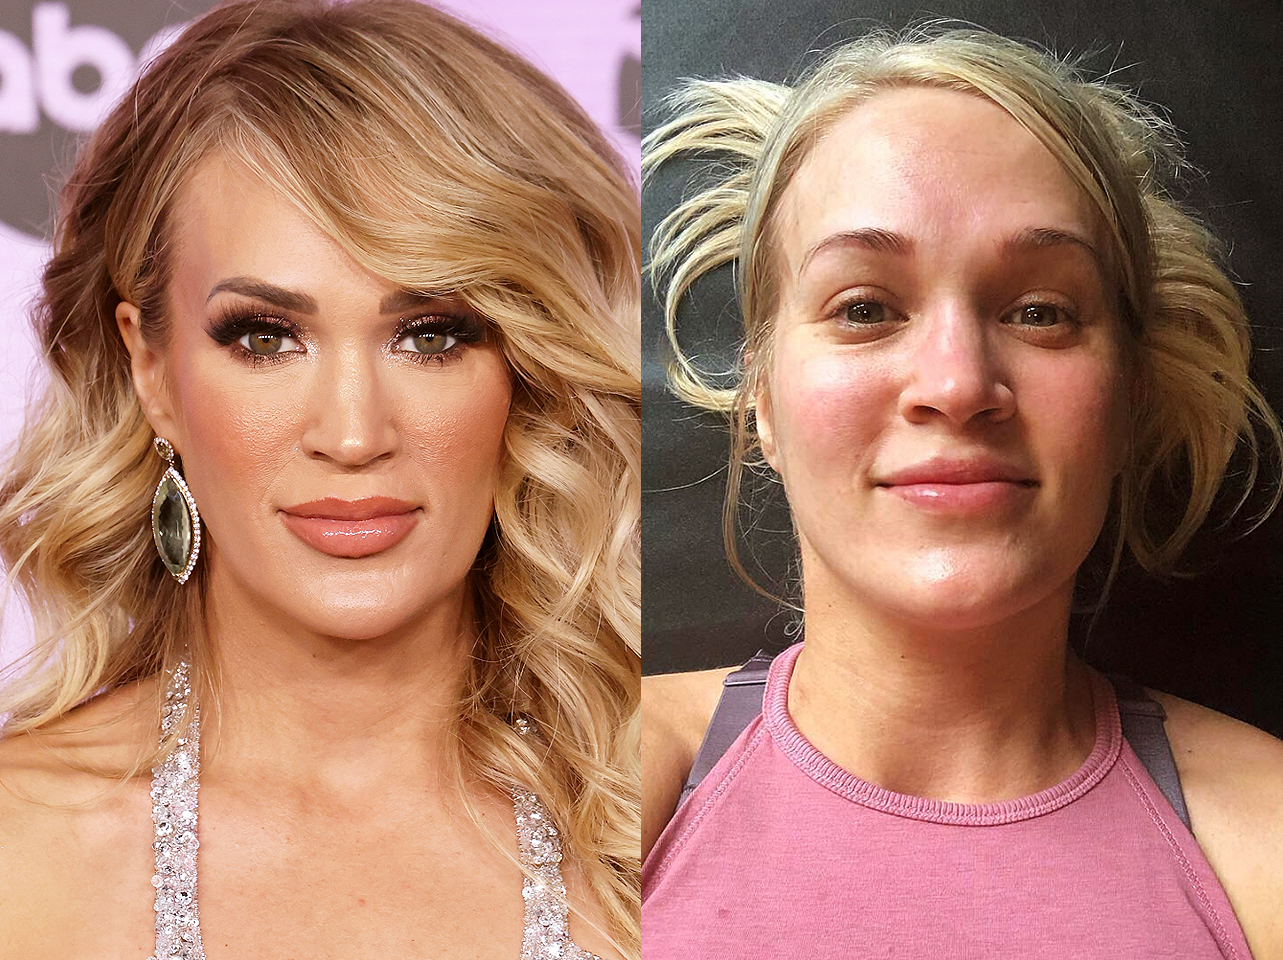 Carrie Underwood with makeup vs without makeup | Source: Getty Images | Instagram/carrieunderwood